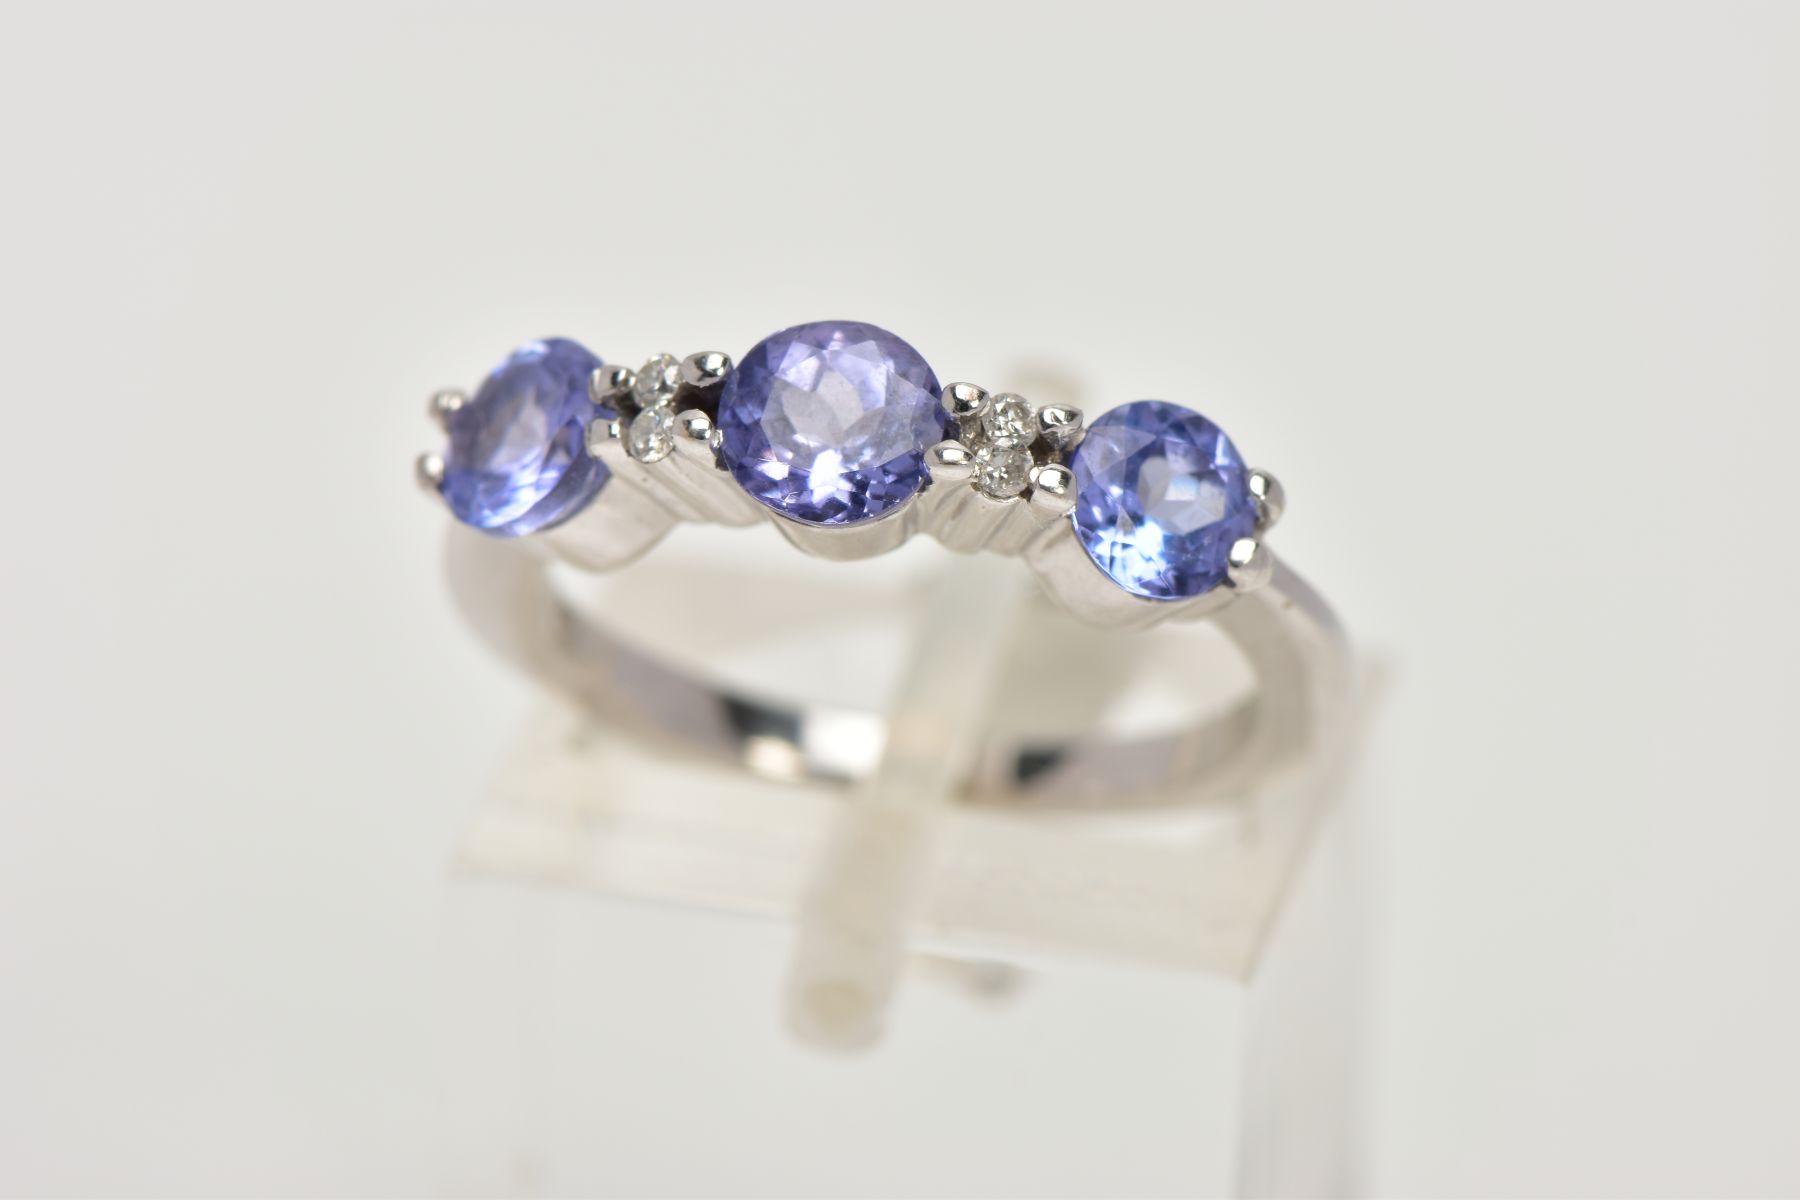 A TANZANITE AND DIAMOND RING, designed as three circular cut tanzanites each interspaced by two